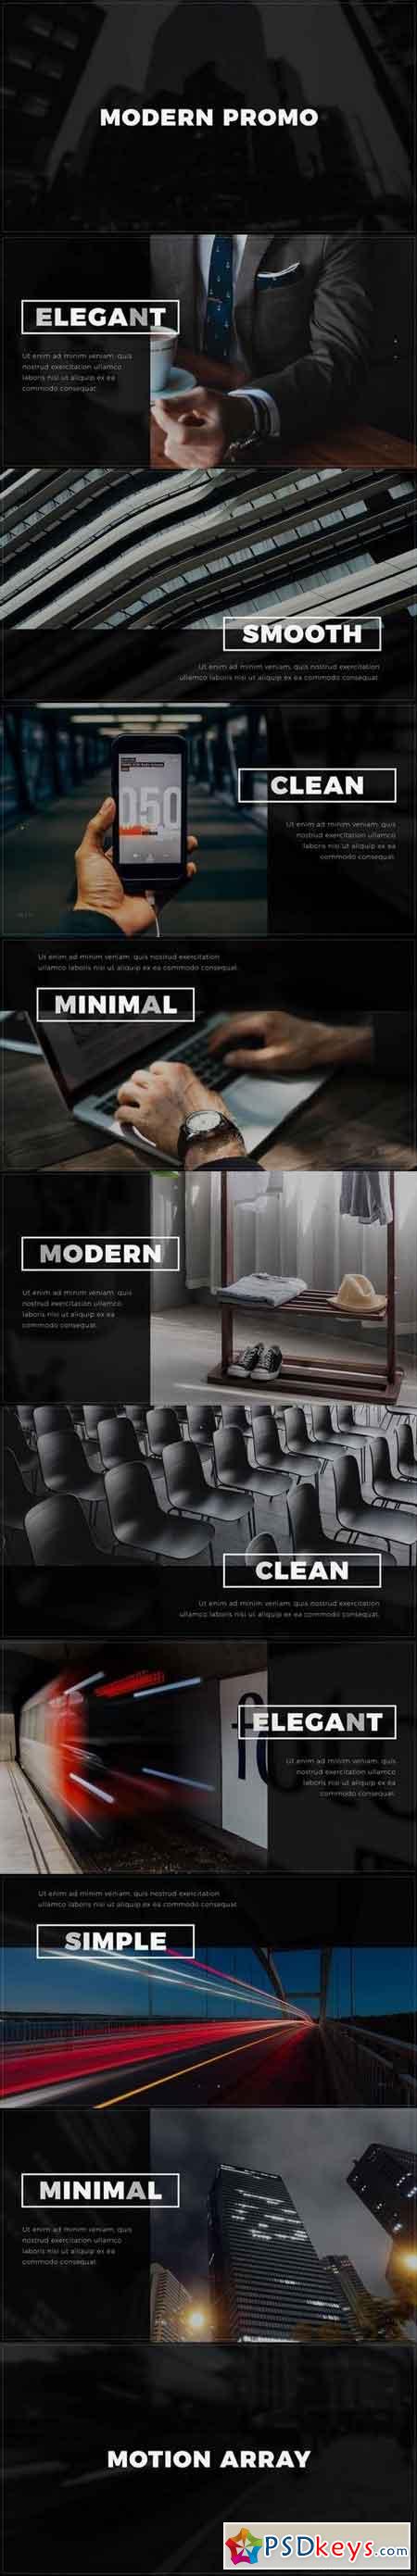 Modern Promo 57270 - After Effects Projects